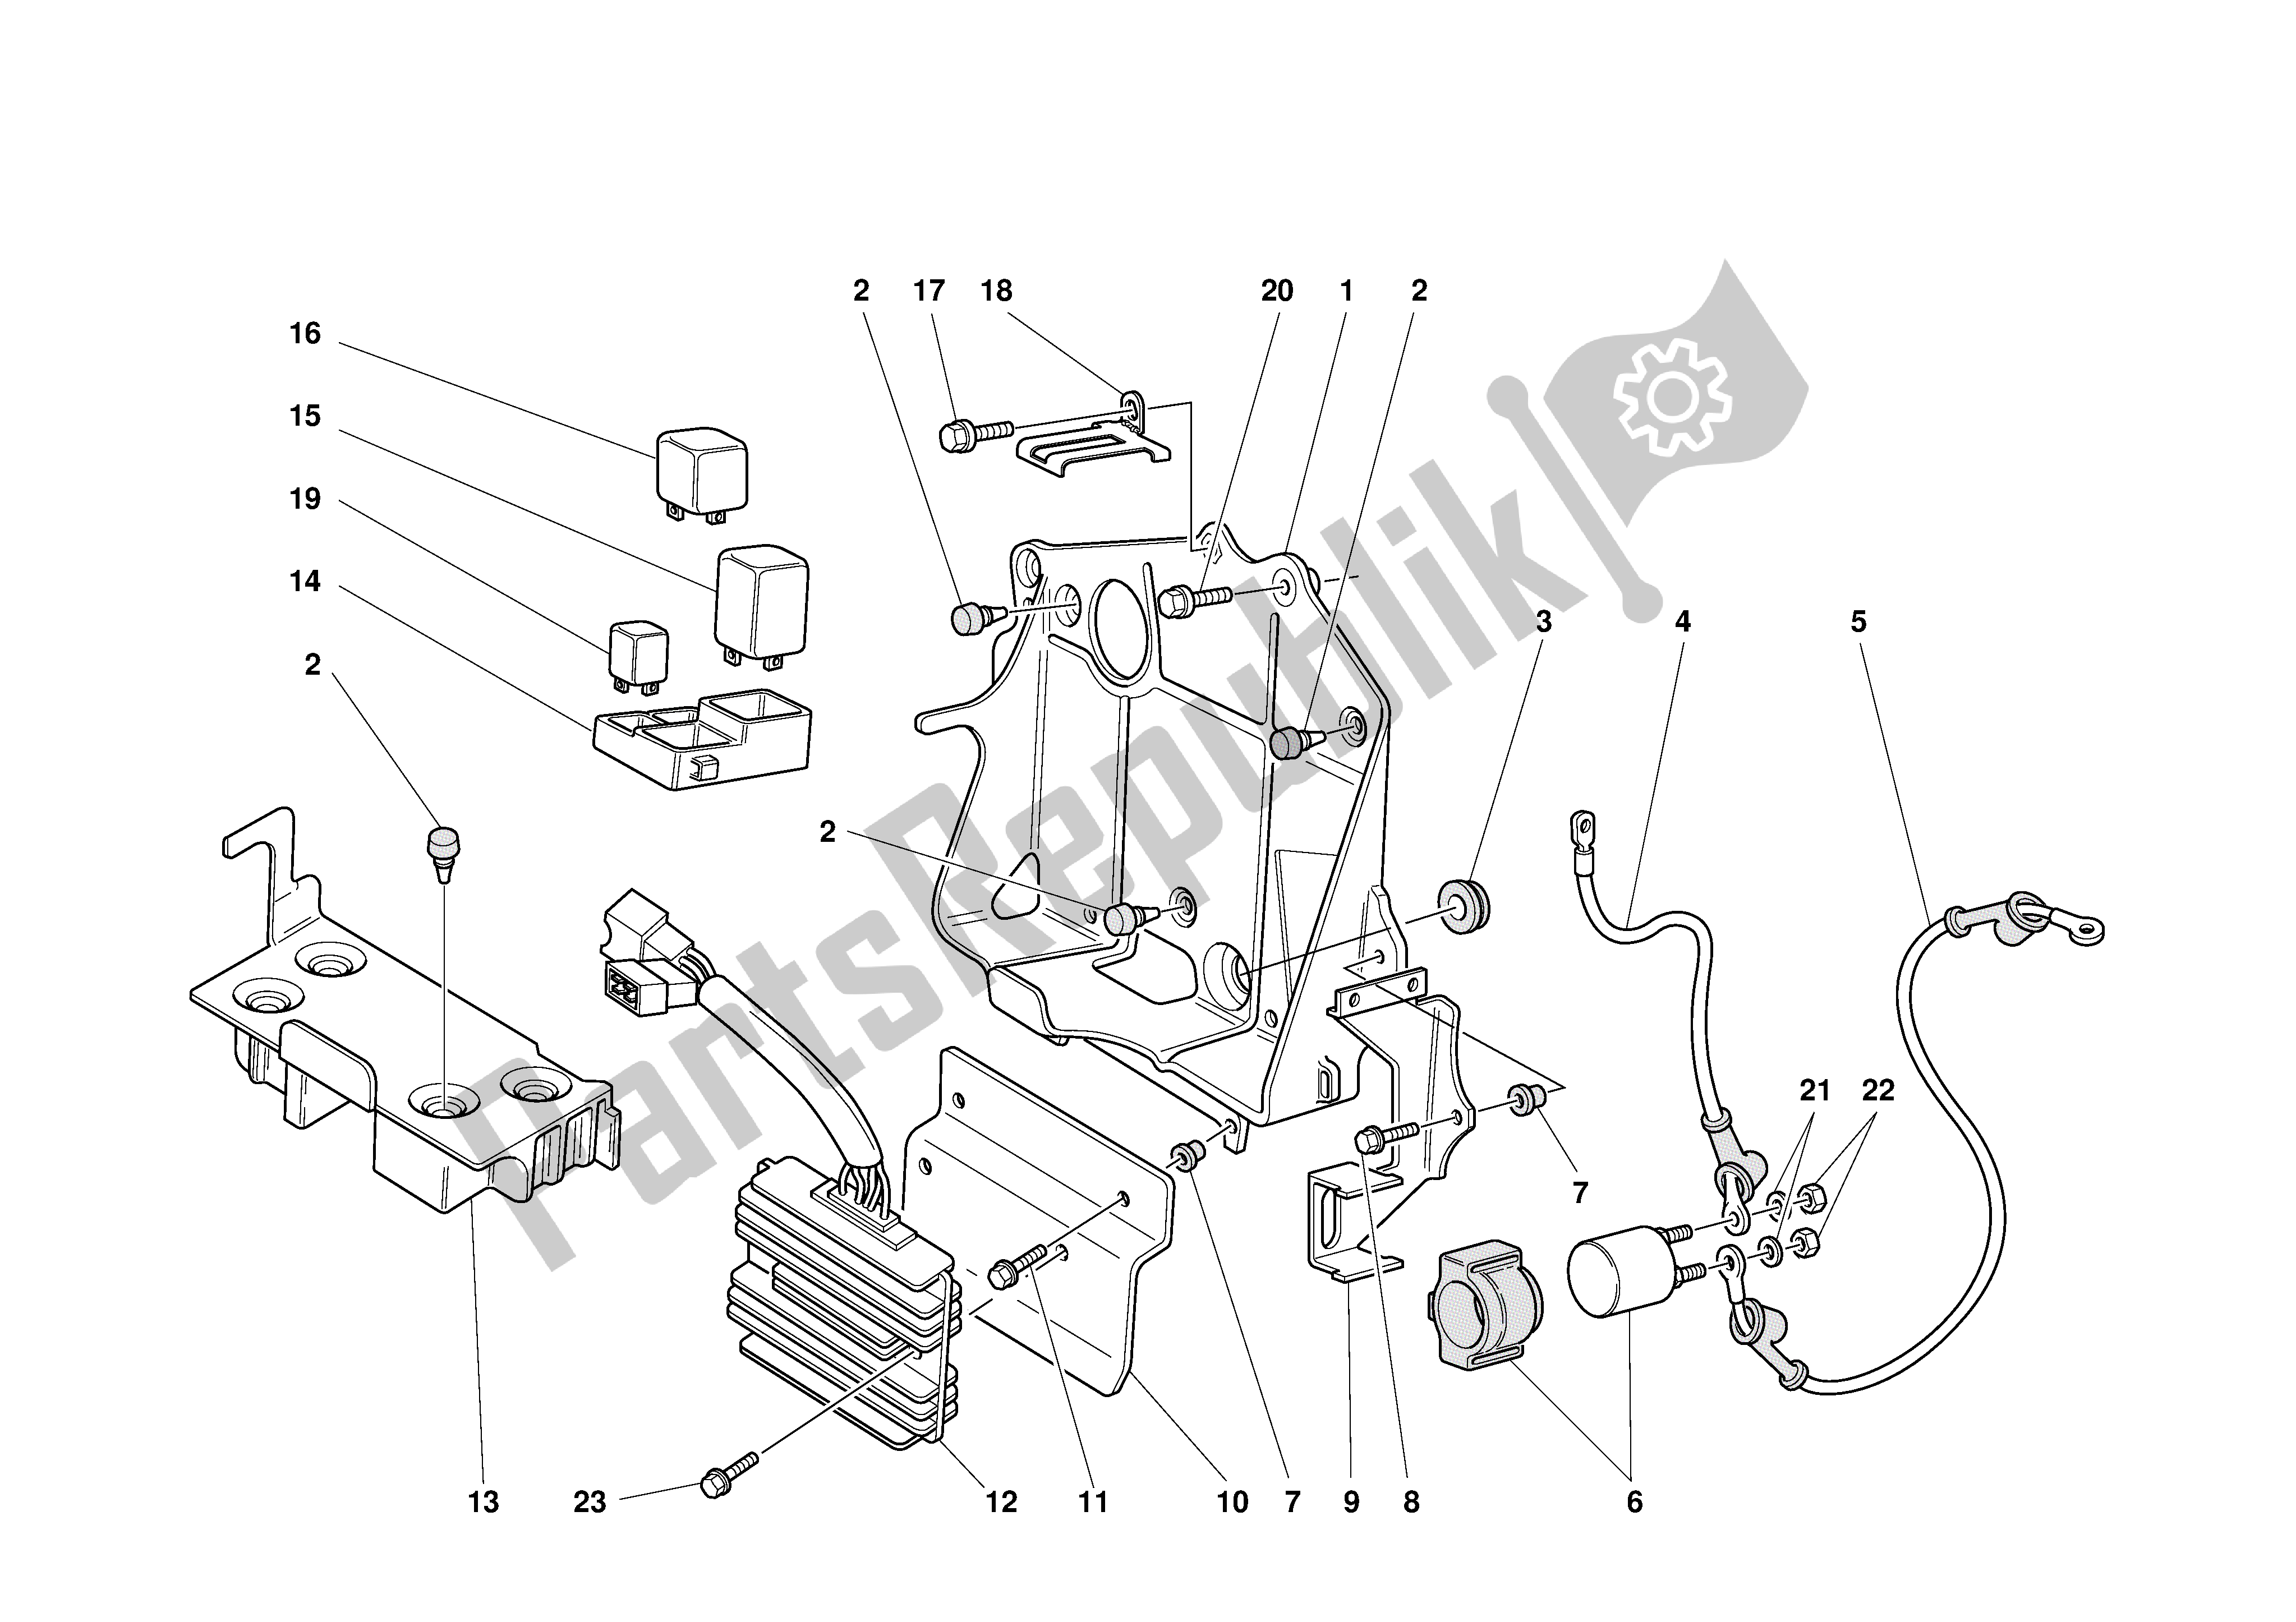 All parts for the Electric System of the Ducati 748 2001